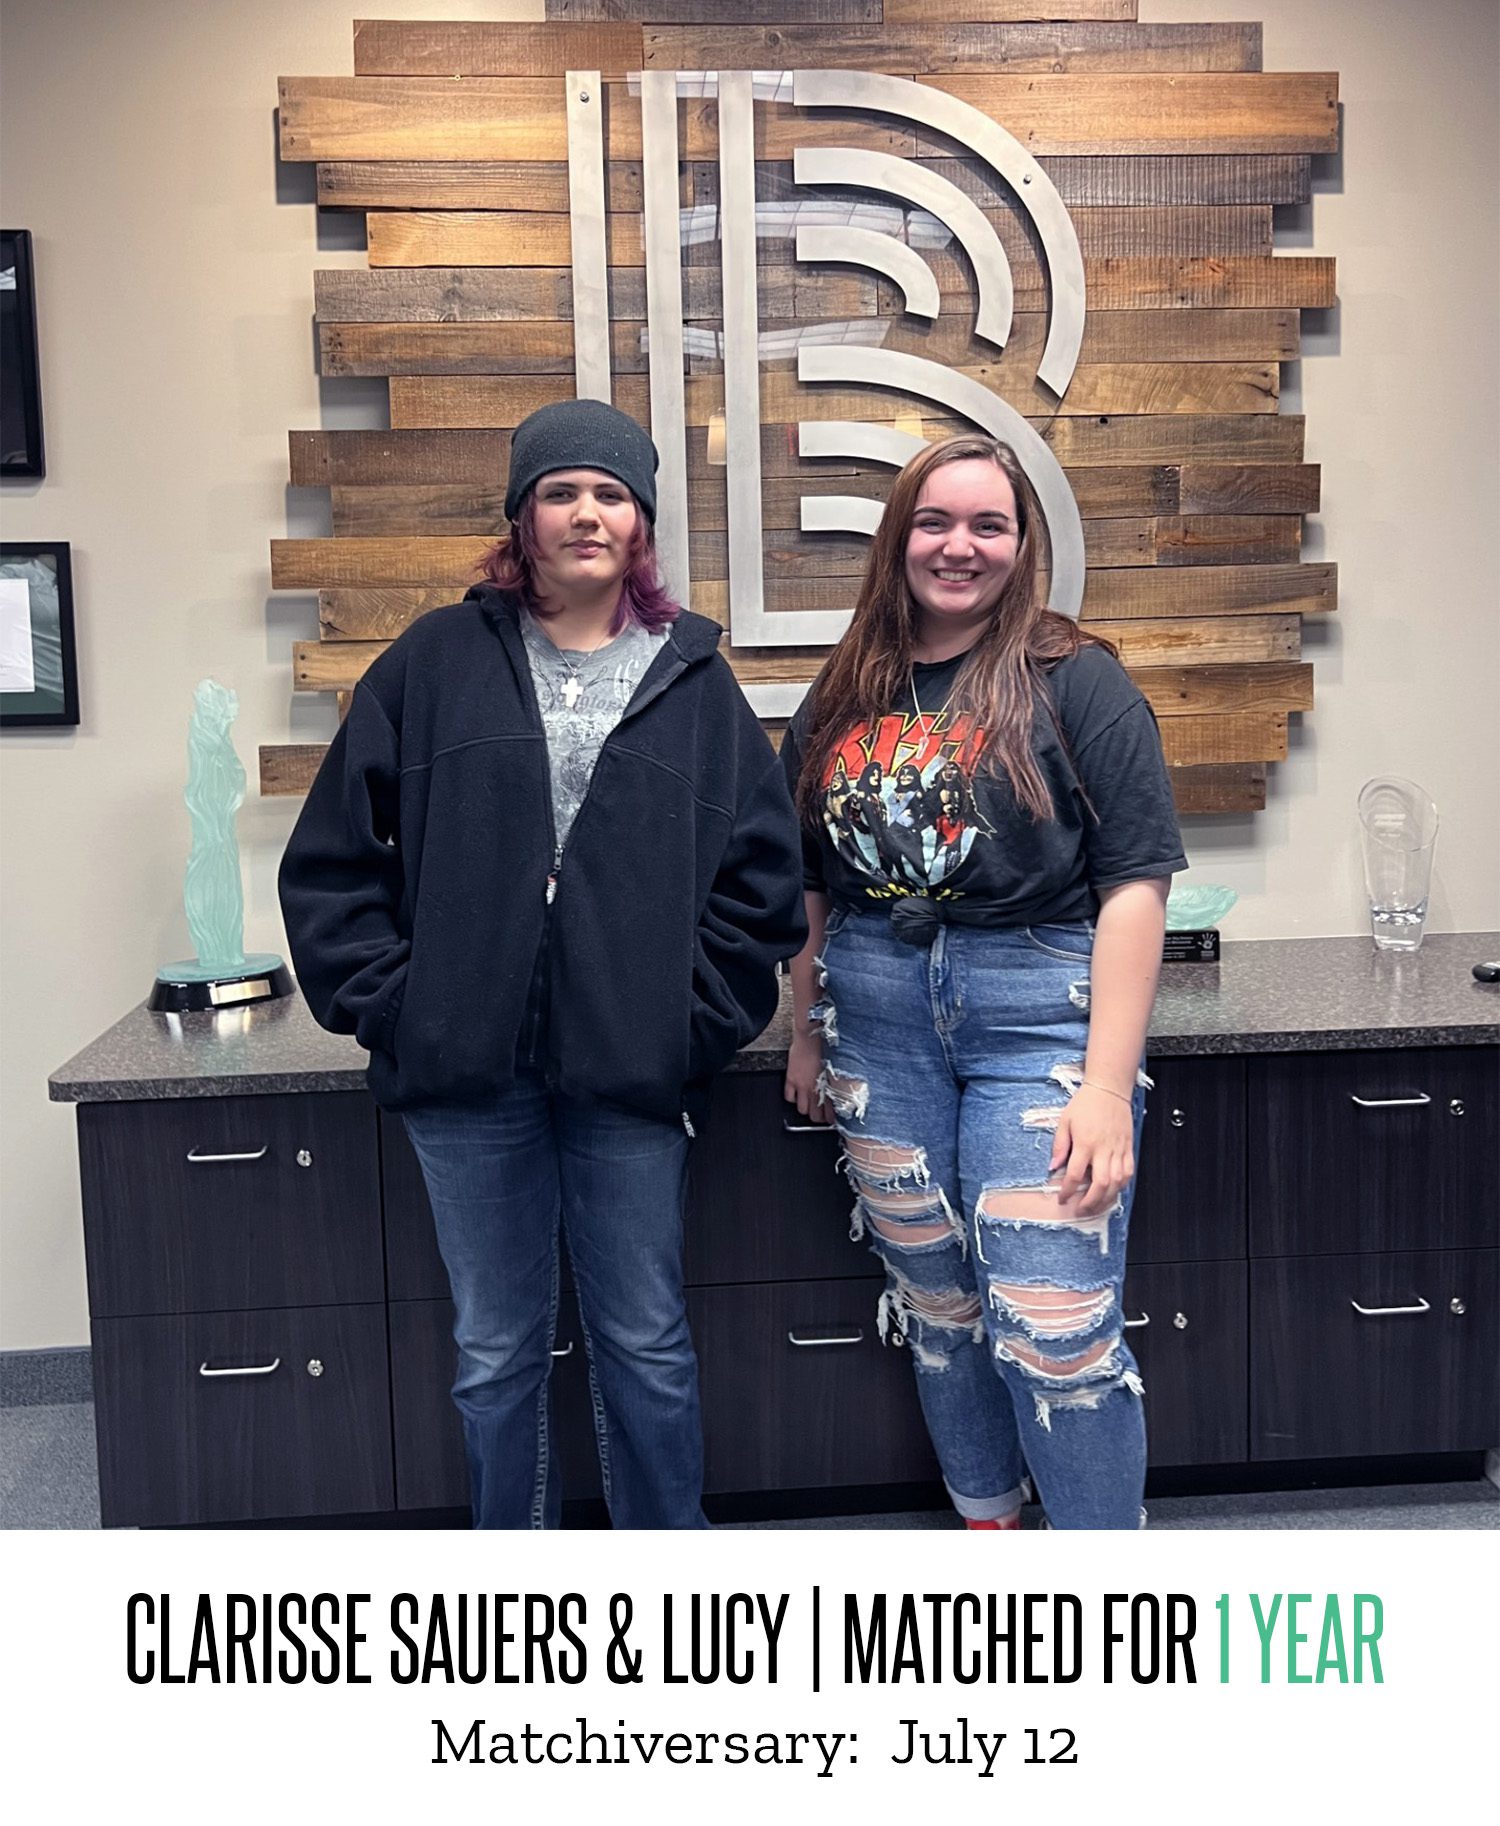 Clarisse Sauers and Lucy 1 Year Matchiversary